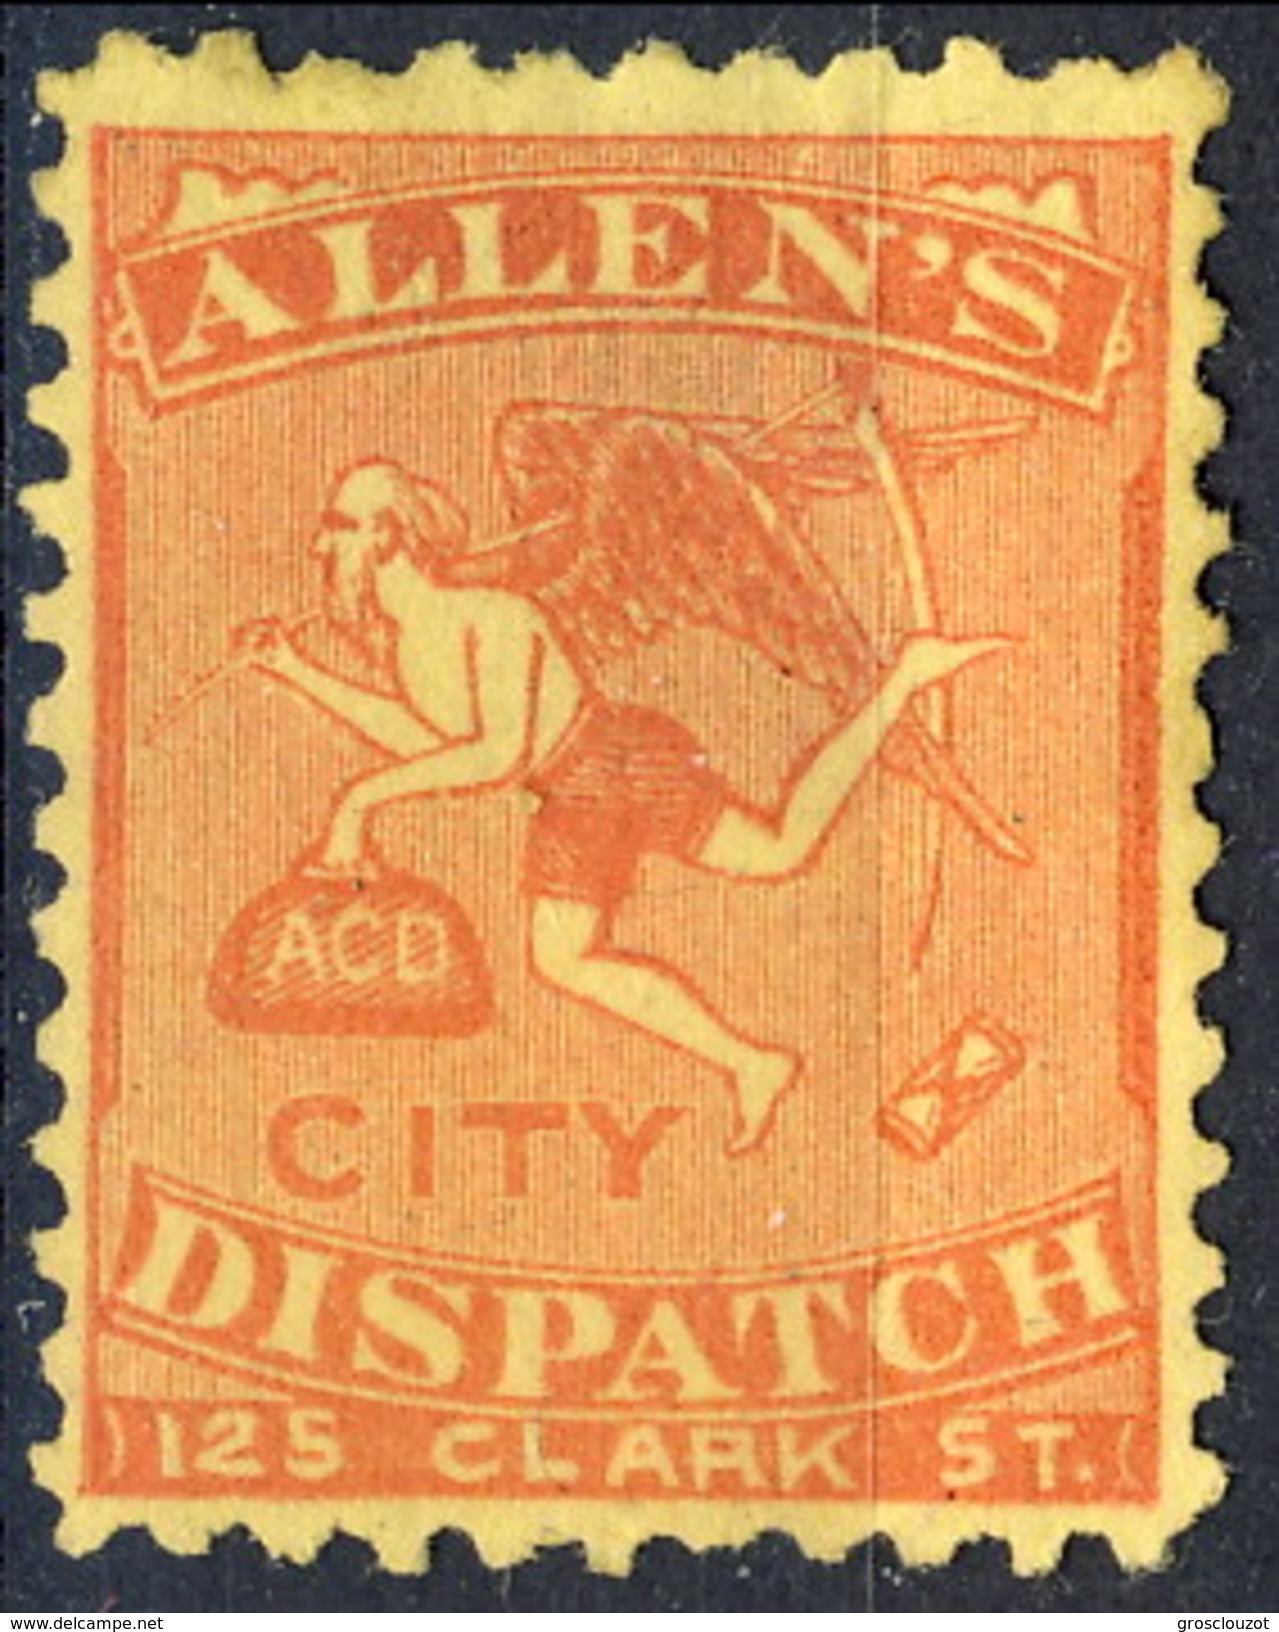 US Sc# 3L3 LOCAL Allen's City Dispatch 125-Clark Street, Red Yellow 1883 $400 - Postes Locales